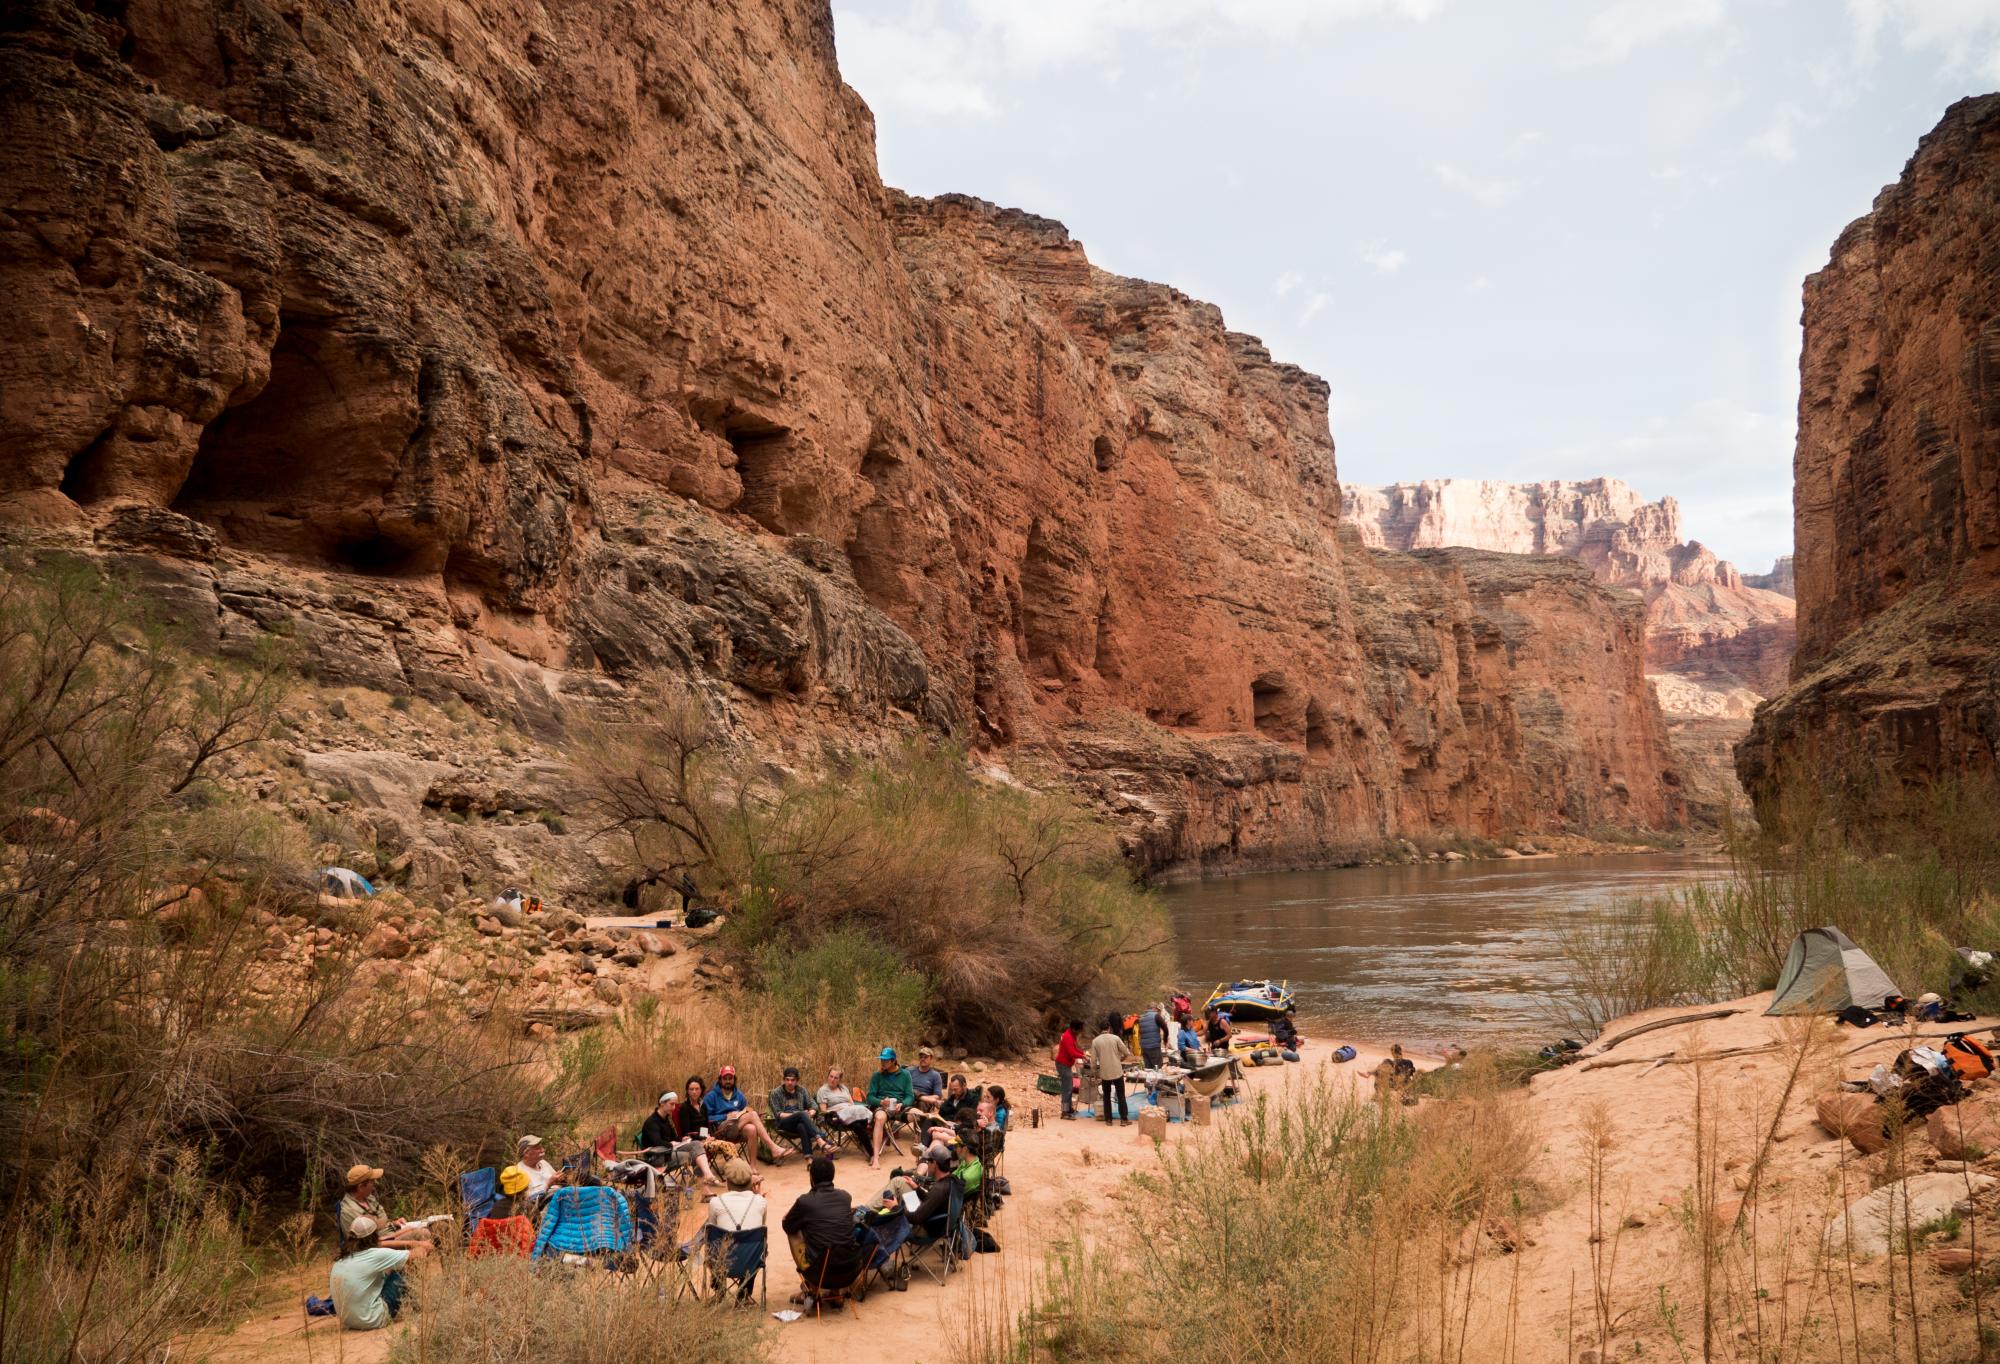 Men and women sit in circle on beach by Colorado River in Grand Canyon